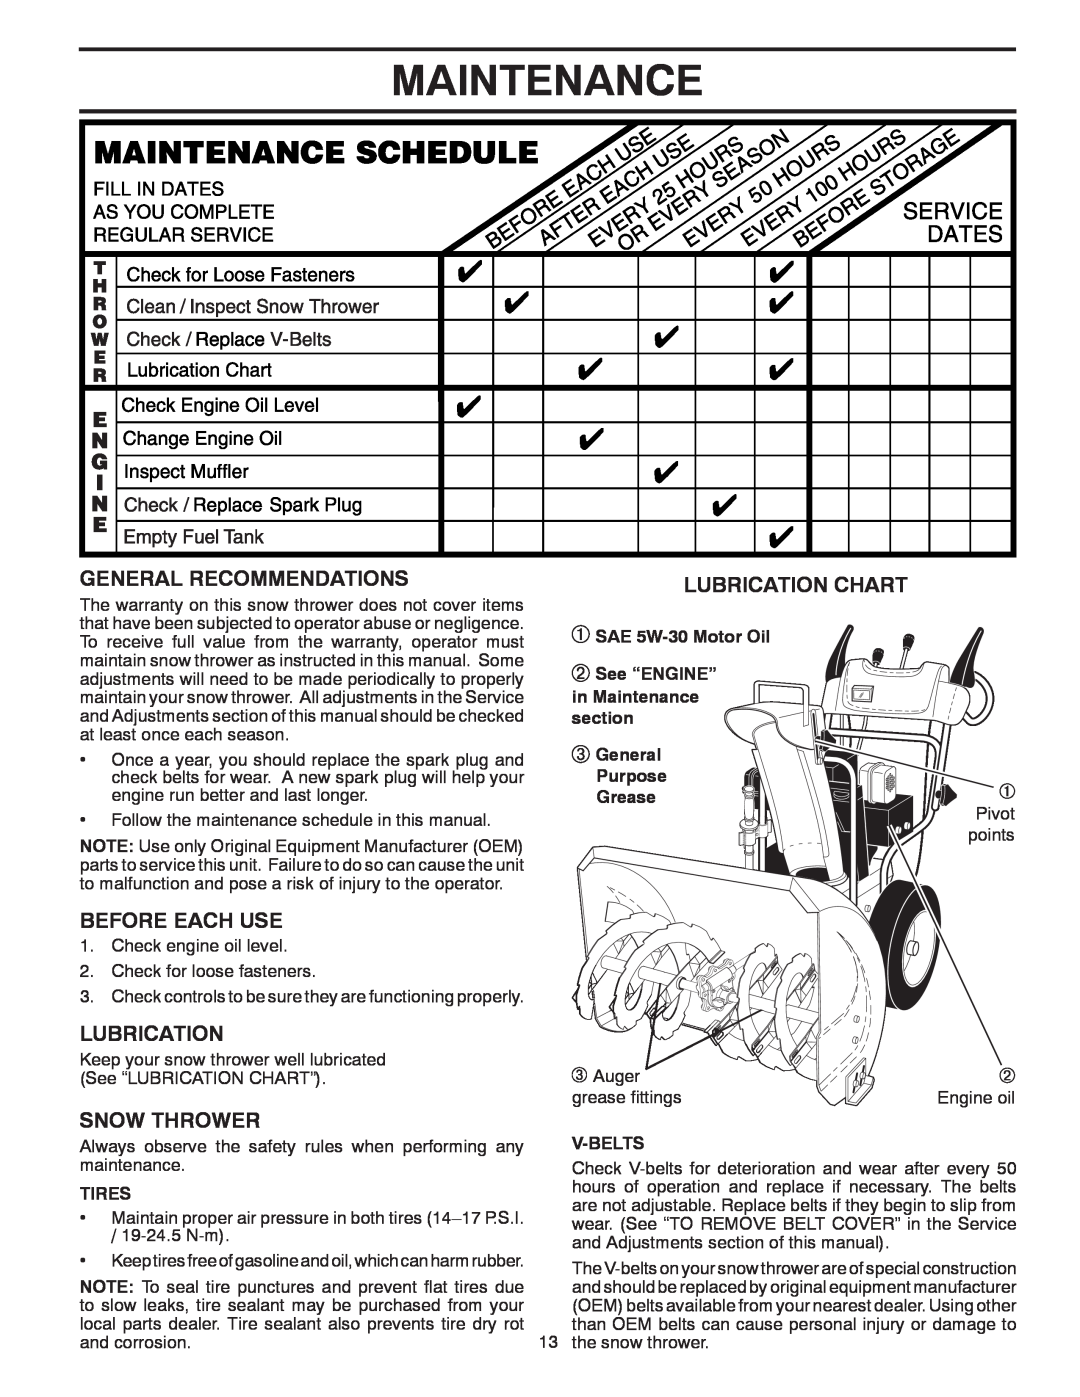 Poulan 419002 Maintenance, General Recommendations, Before Each Use, Snow Thrower, Lubrication Chart, Tires, V-Belts 